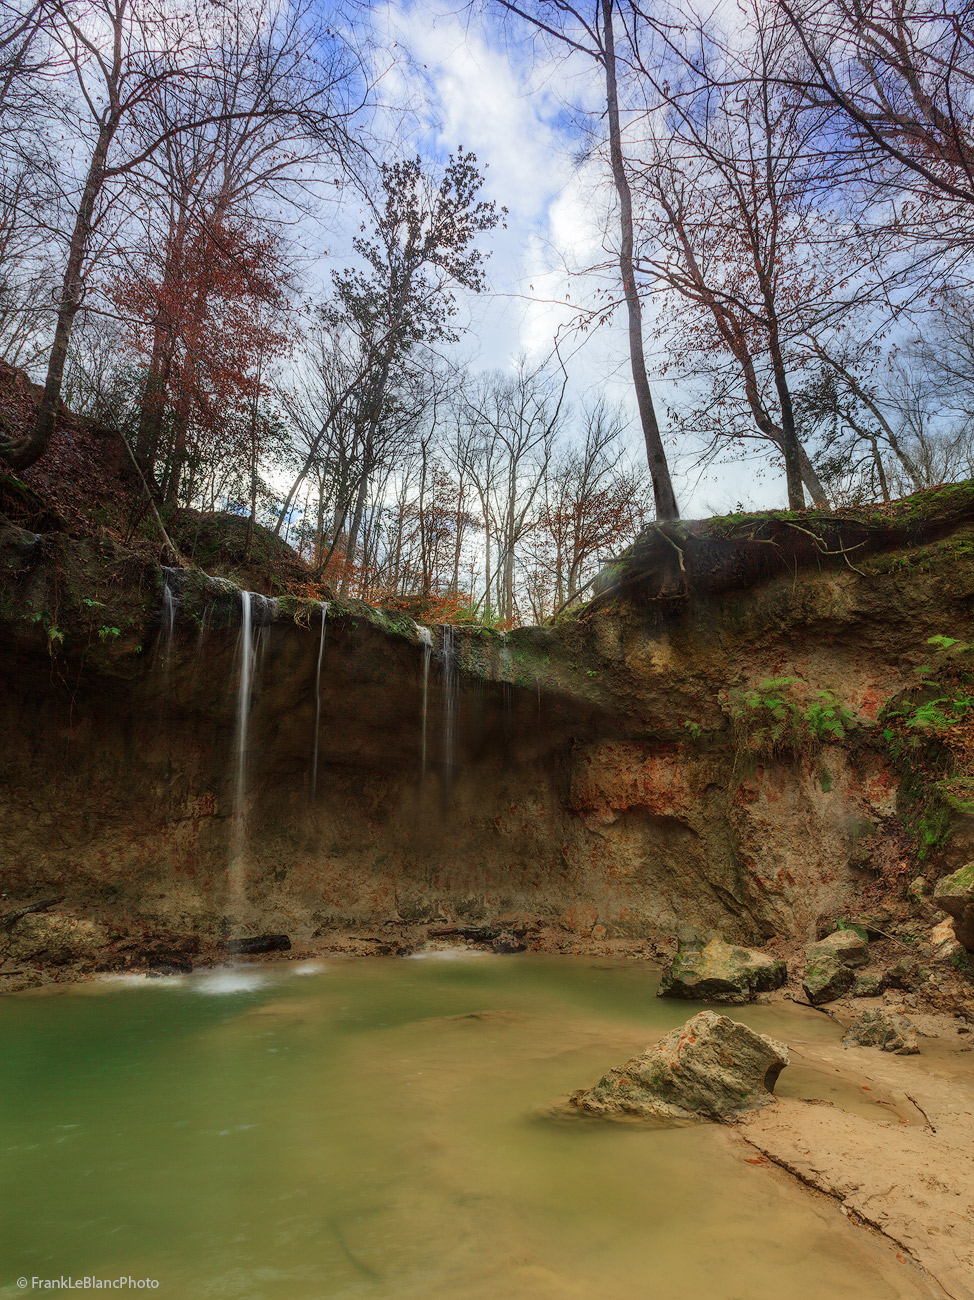 One of several waterfalls in the Clark Creek Natural Area. The cut in the bank shows the colors of clay, green moss and exposed...